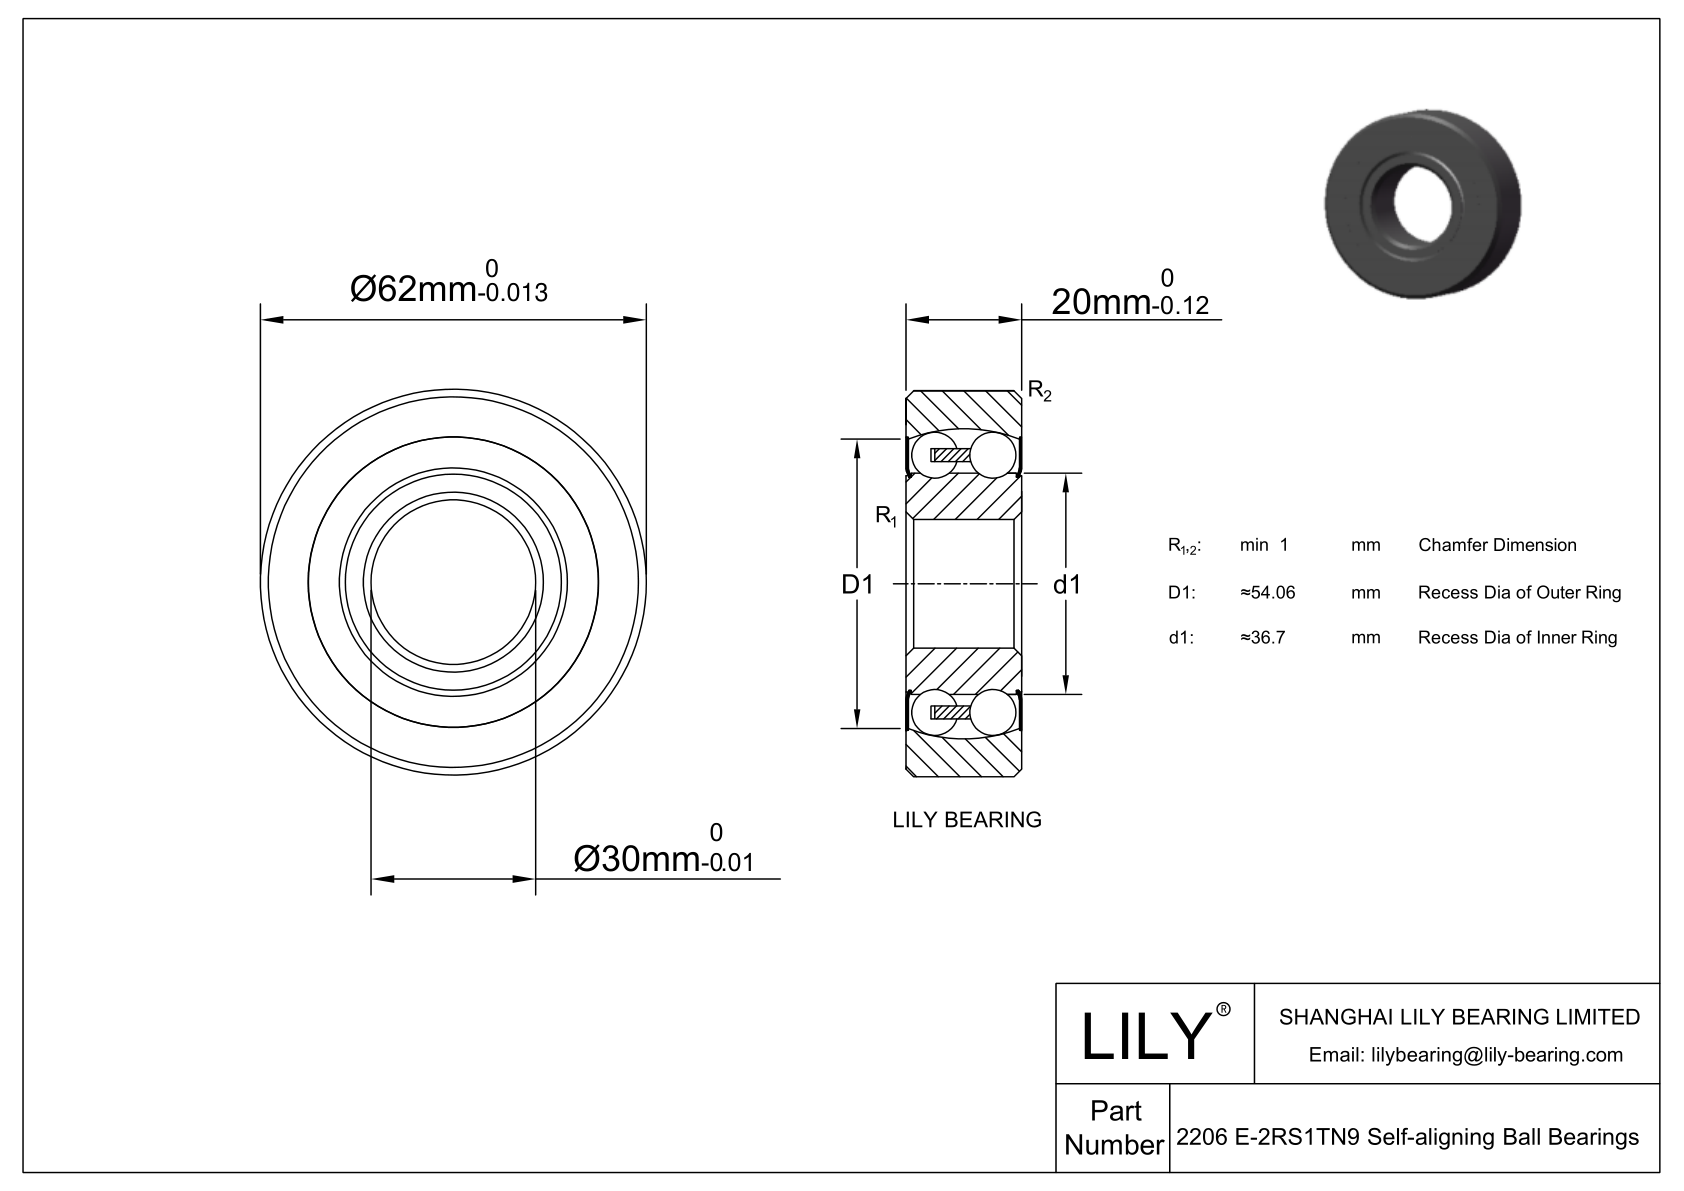 S2206 E-2RS1TN9 Stainless Steel Self Aligning Ball Bearings cad drawing